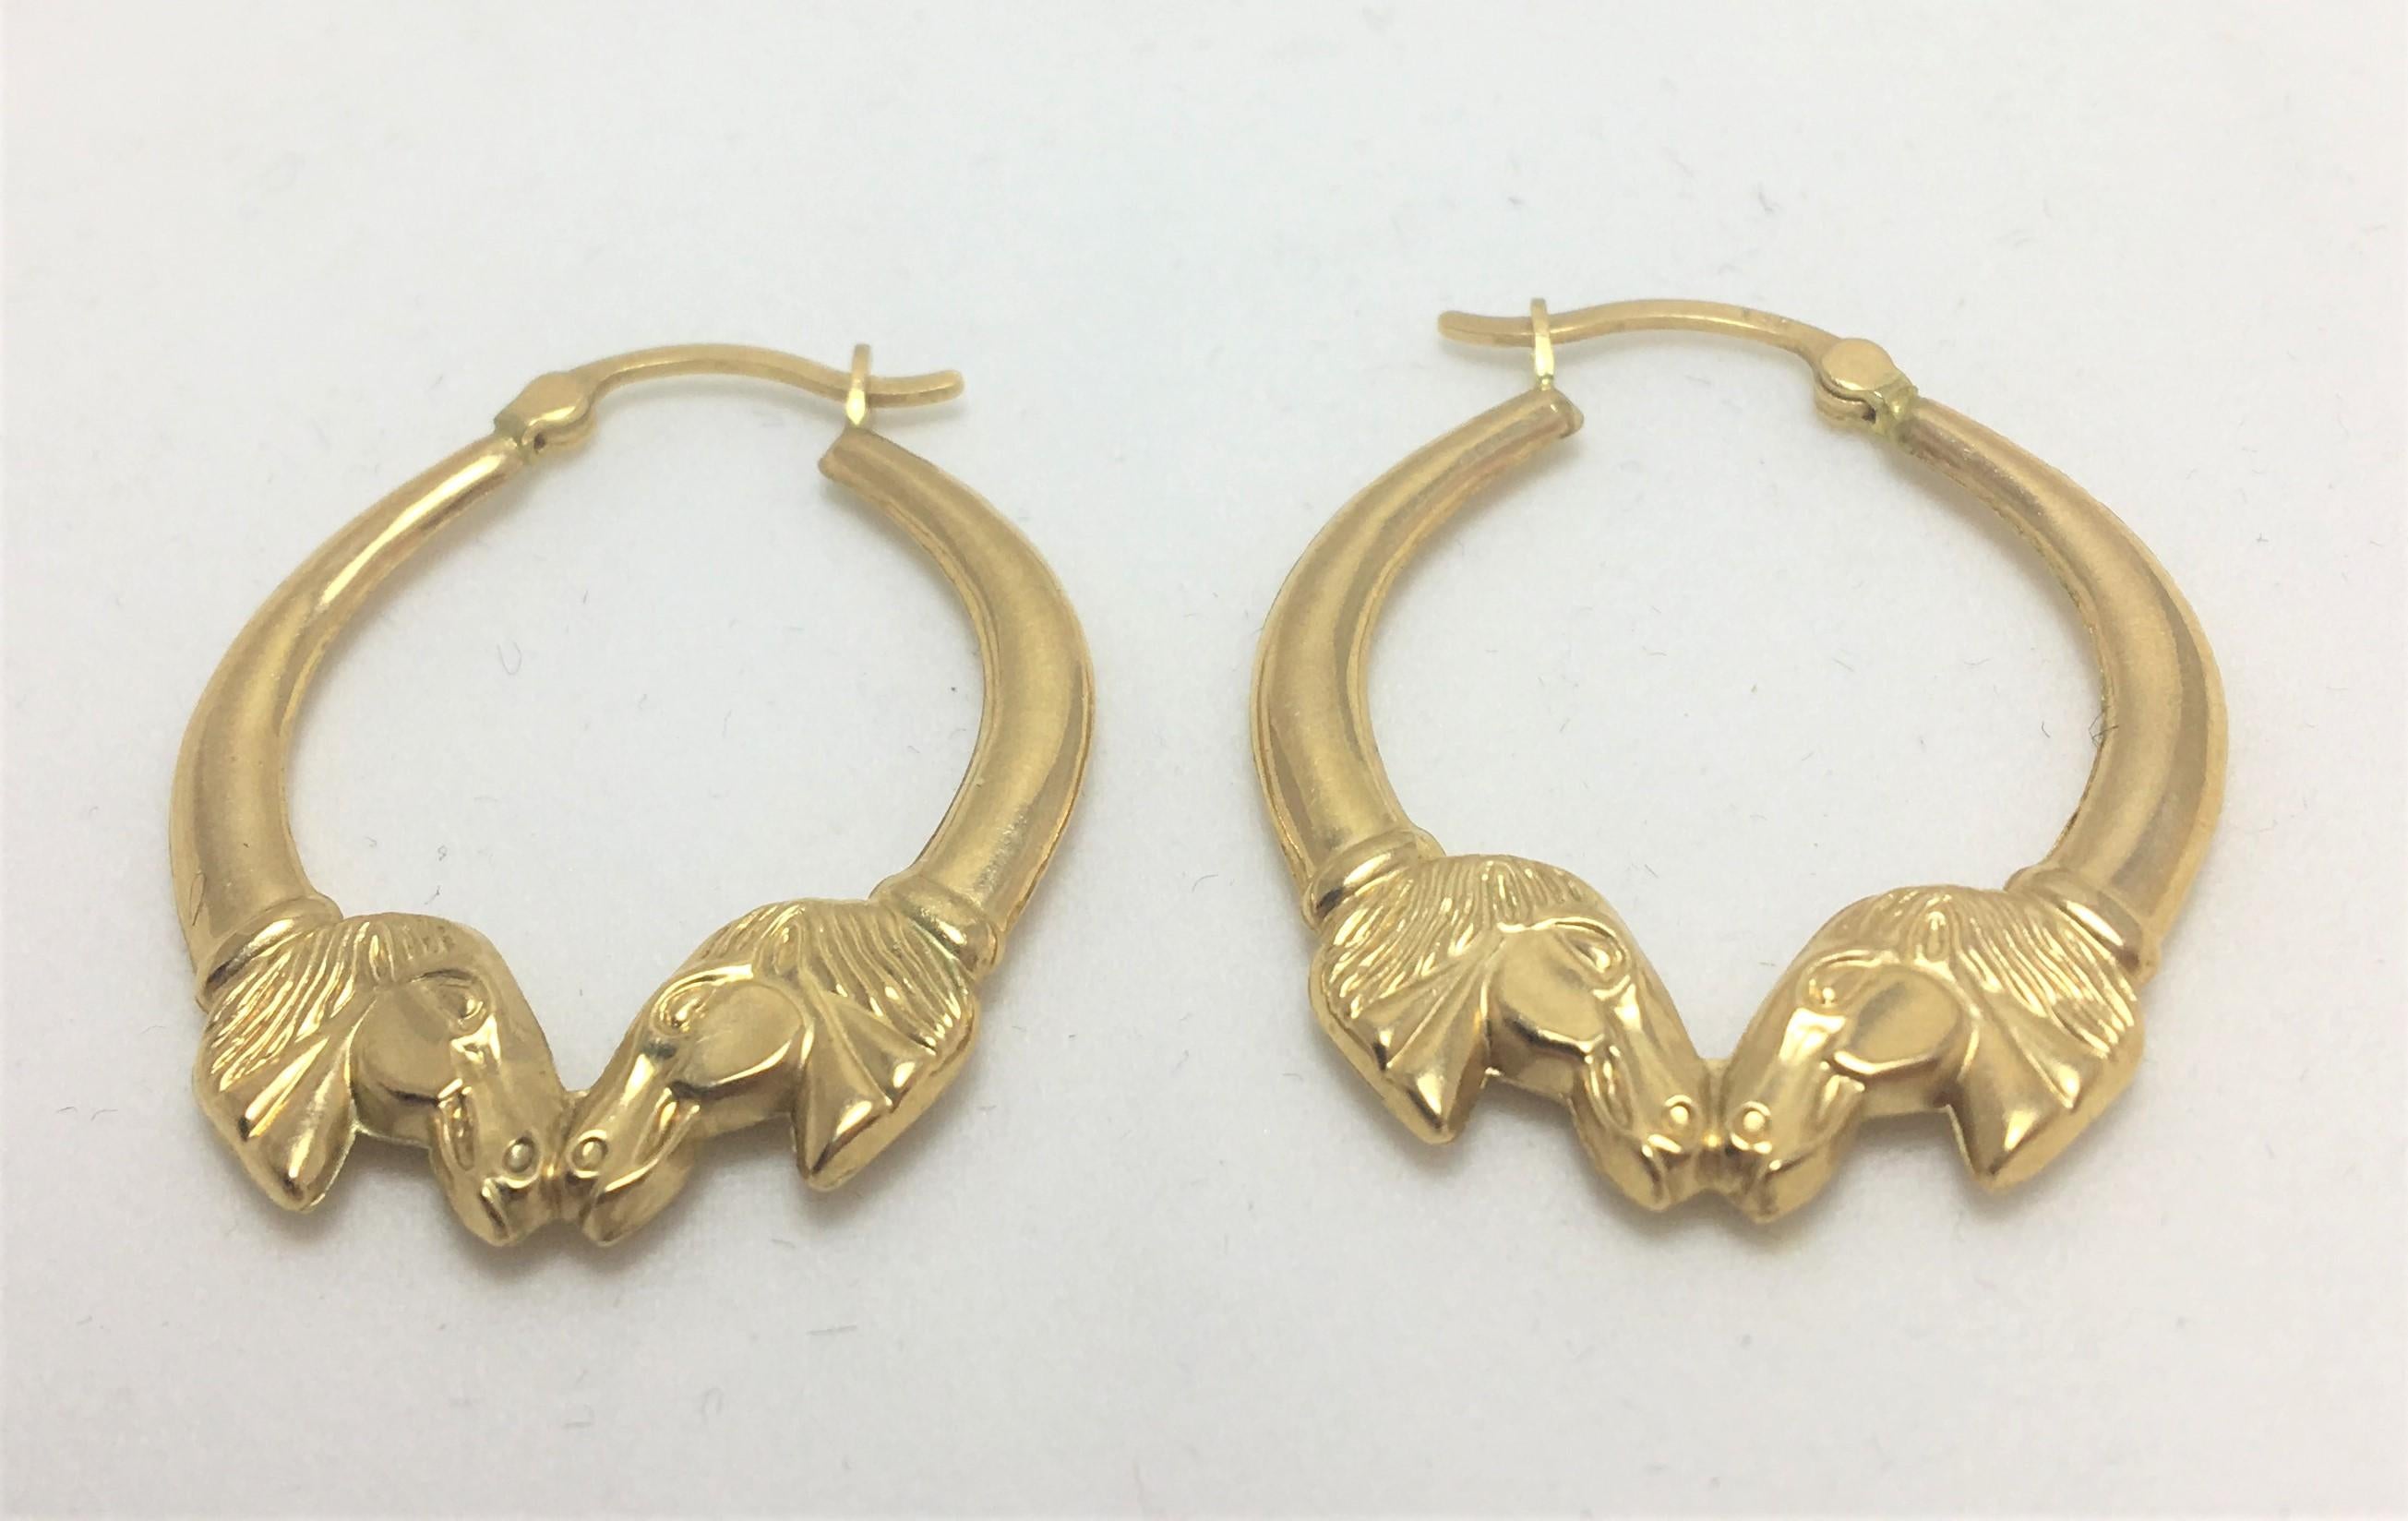 These are great for the equestrian in your life!
14K Gold Hoop Earrings
Hollow, so lightweight and wearable
Approximately 1 inch wide and 1.25 inches long
Ear Wire Clasp